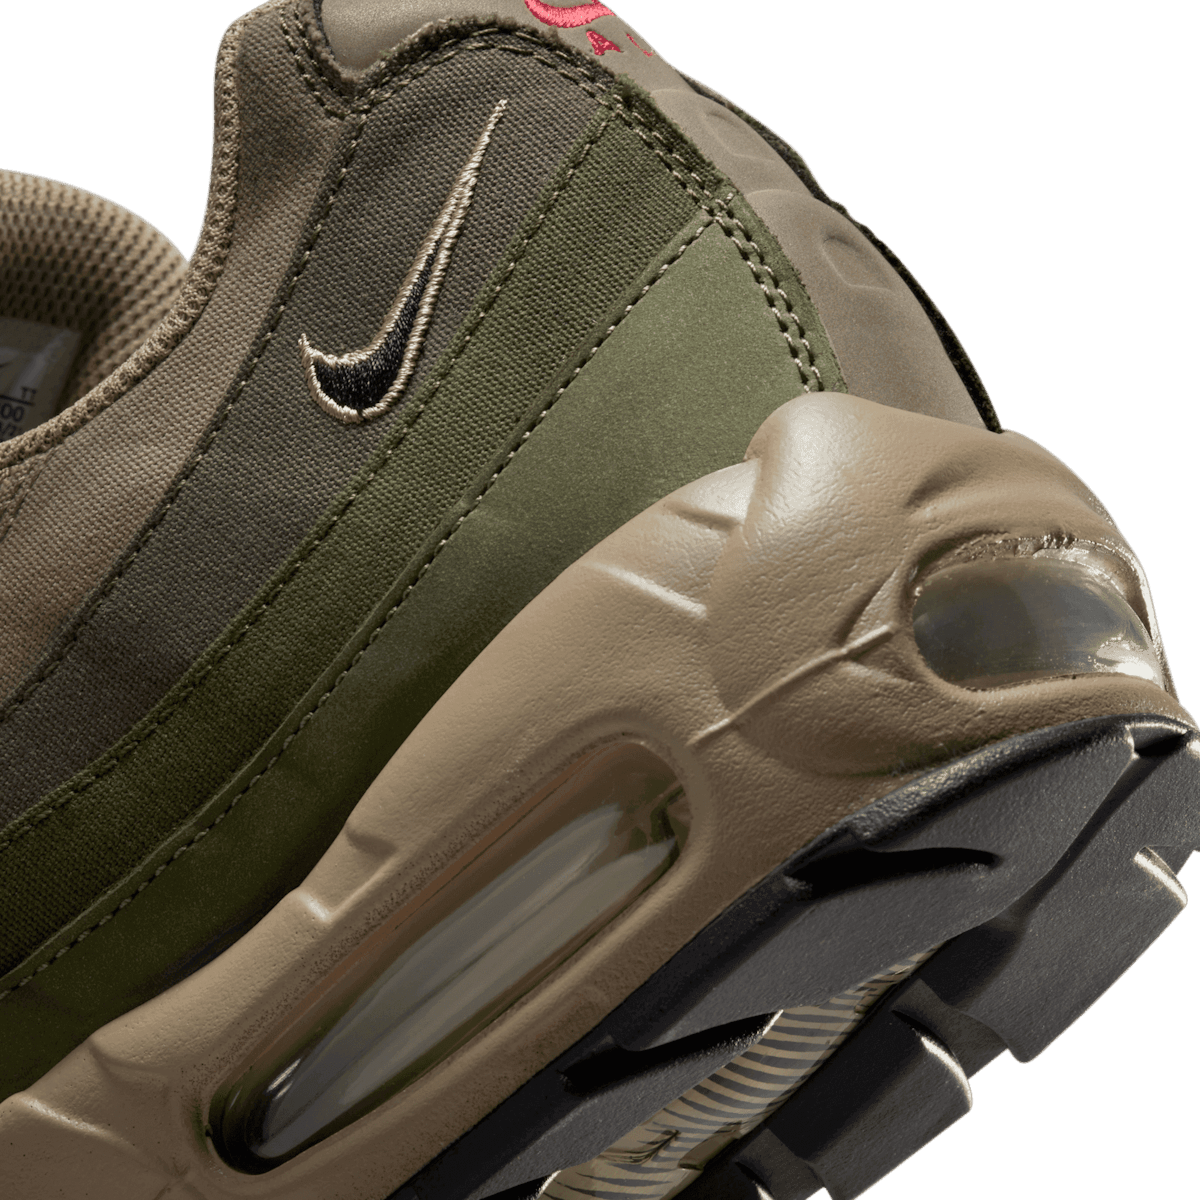 Nike Air Max 95 Matte Olive Angle 5